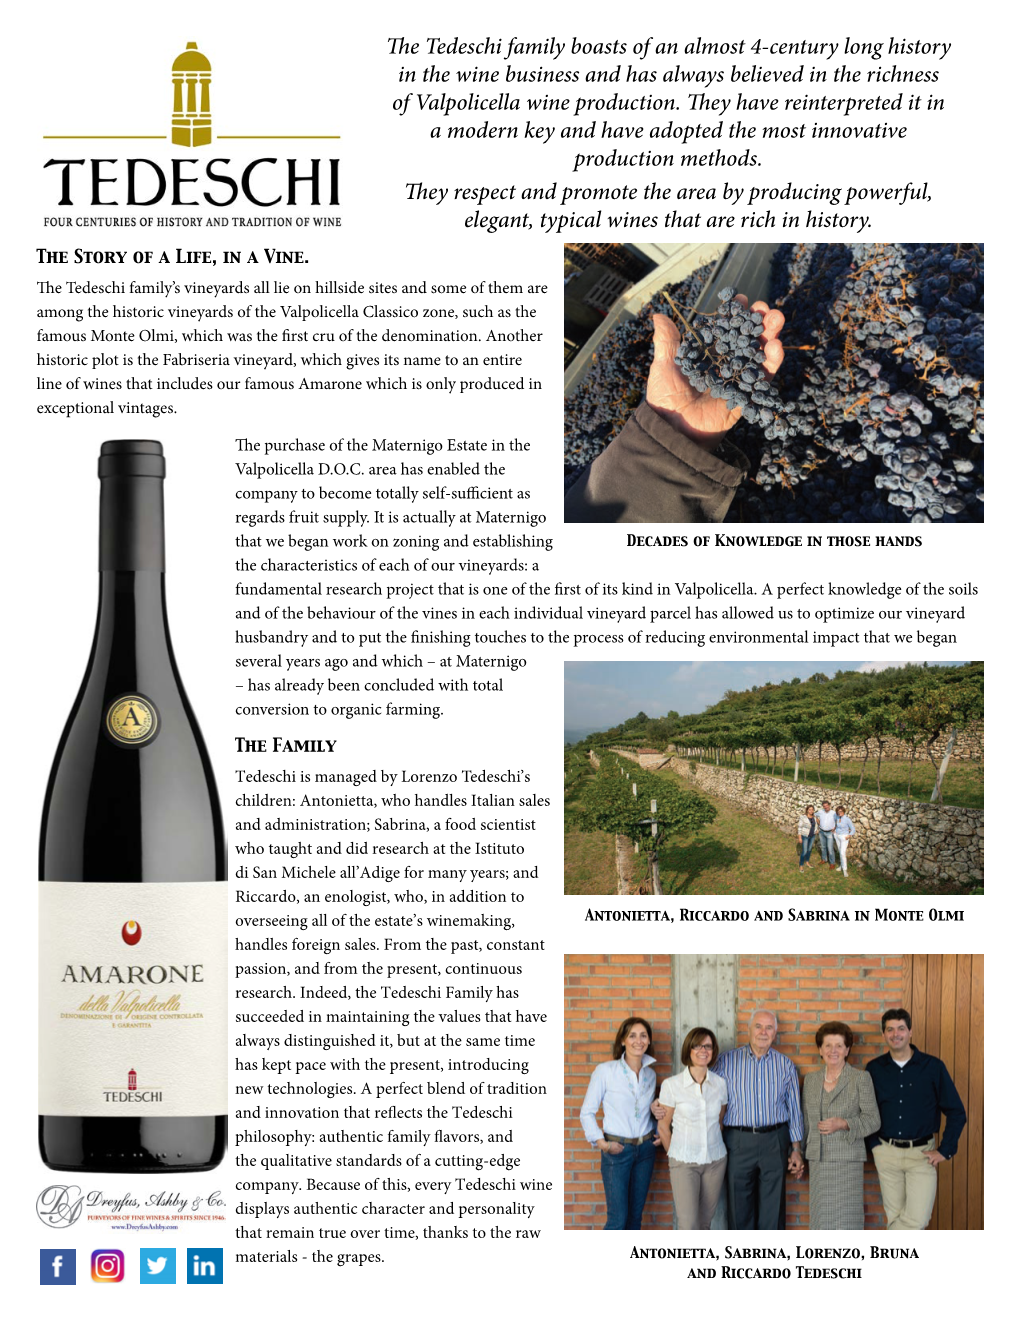 The Tedeschi Family Boasts of an Almost 4-Century Long History in the Wine Business and Has Always Believed in the Richness of Valpolicella Wine Production